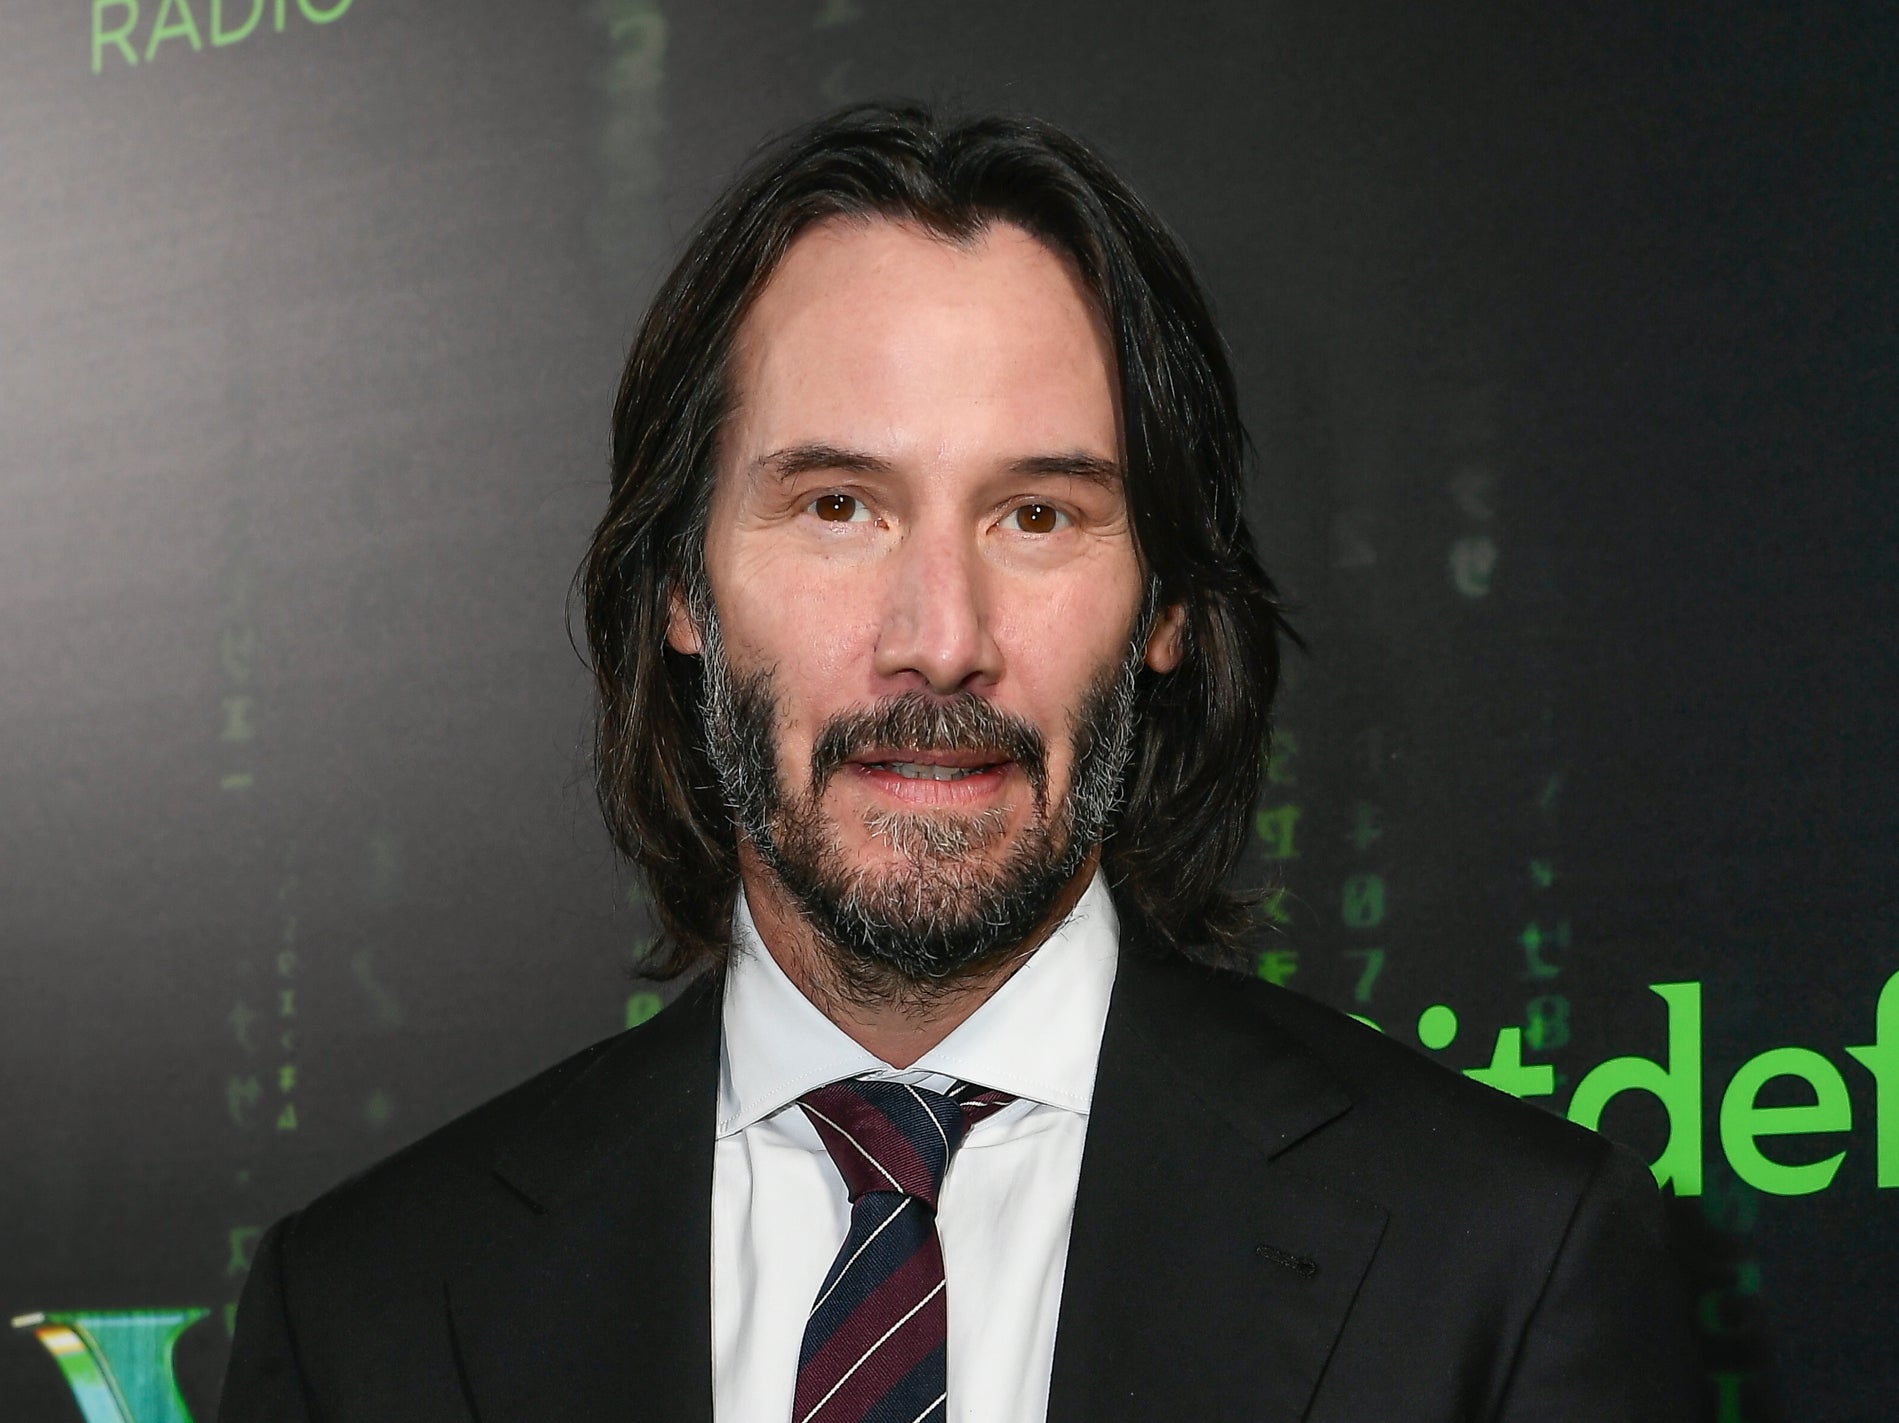 Keanu Reeves reported that he donated $31.5m from his Matrix income to cancer research